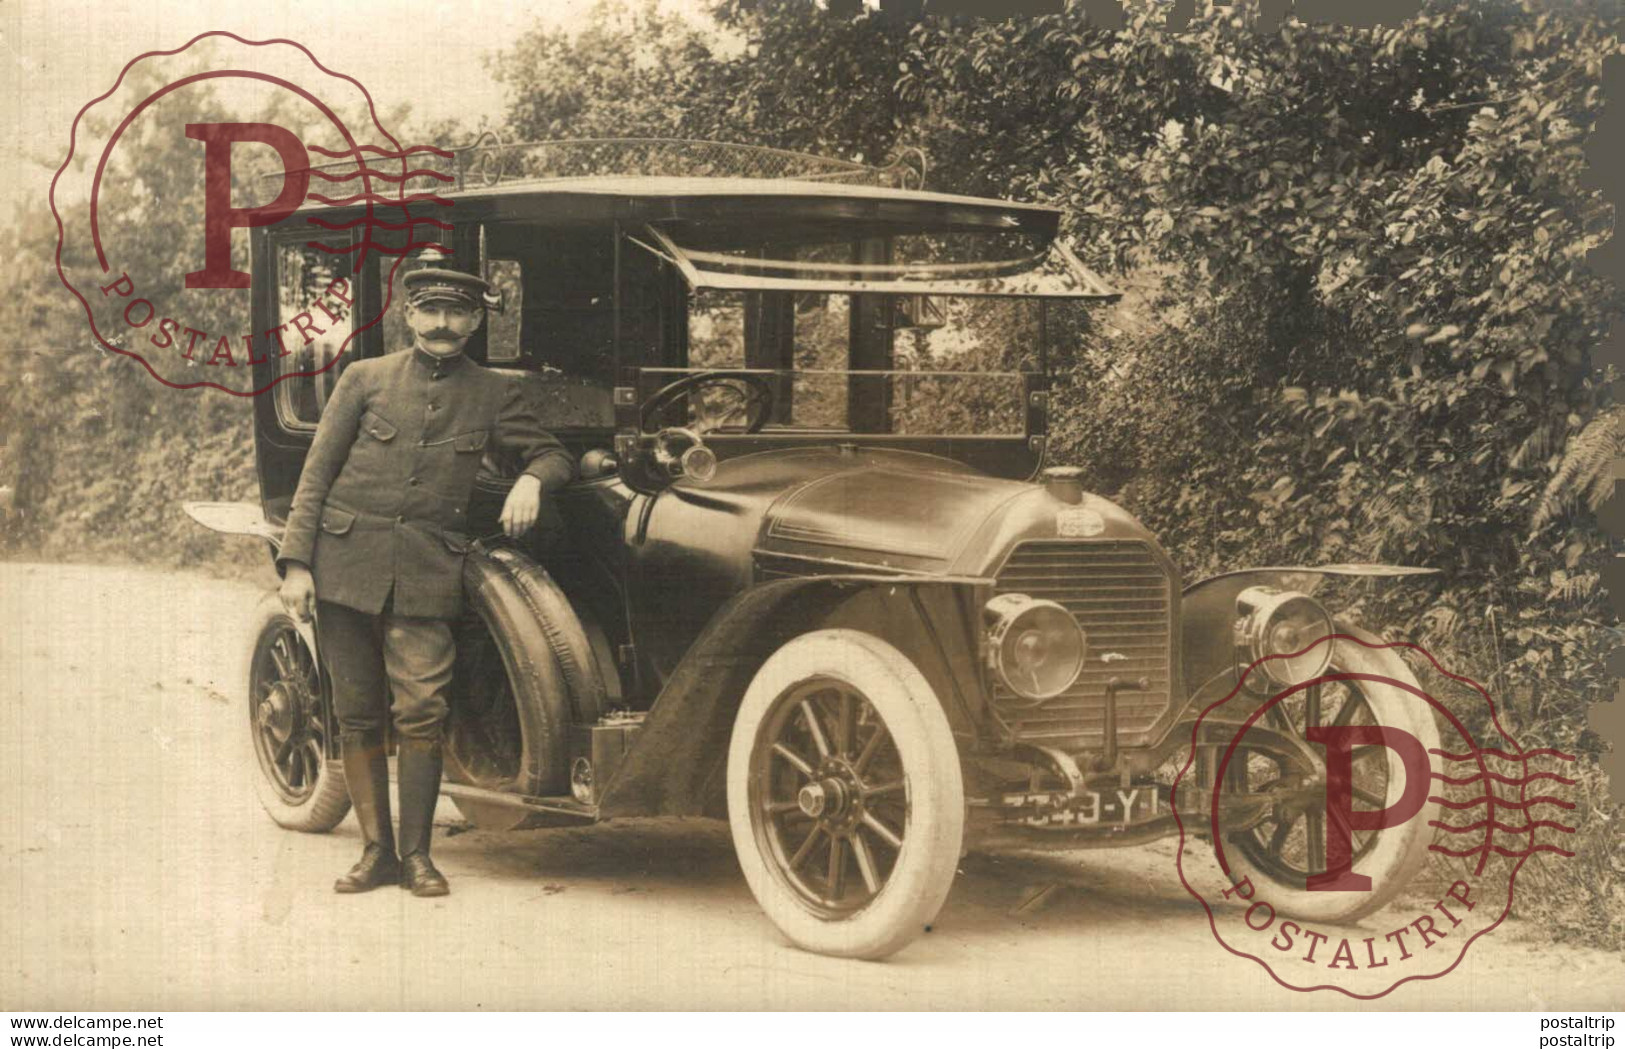 PEUGEOT TAXI  CARTE PHOTO RPPC LITTLE DAMAGE ON THE BACK NOT THE PHOTO   The Bryan Goodman Collection - Taxis & Droschken